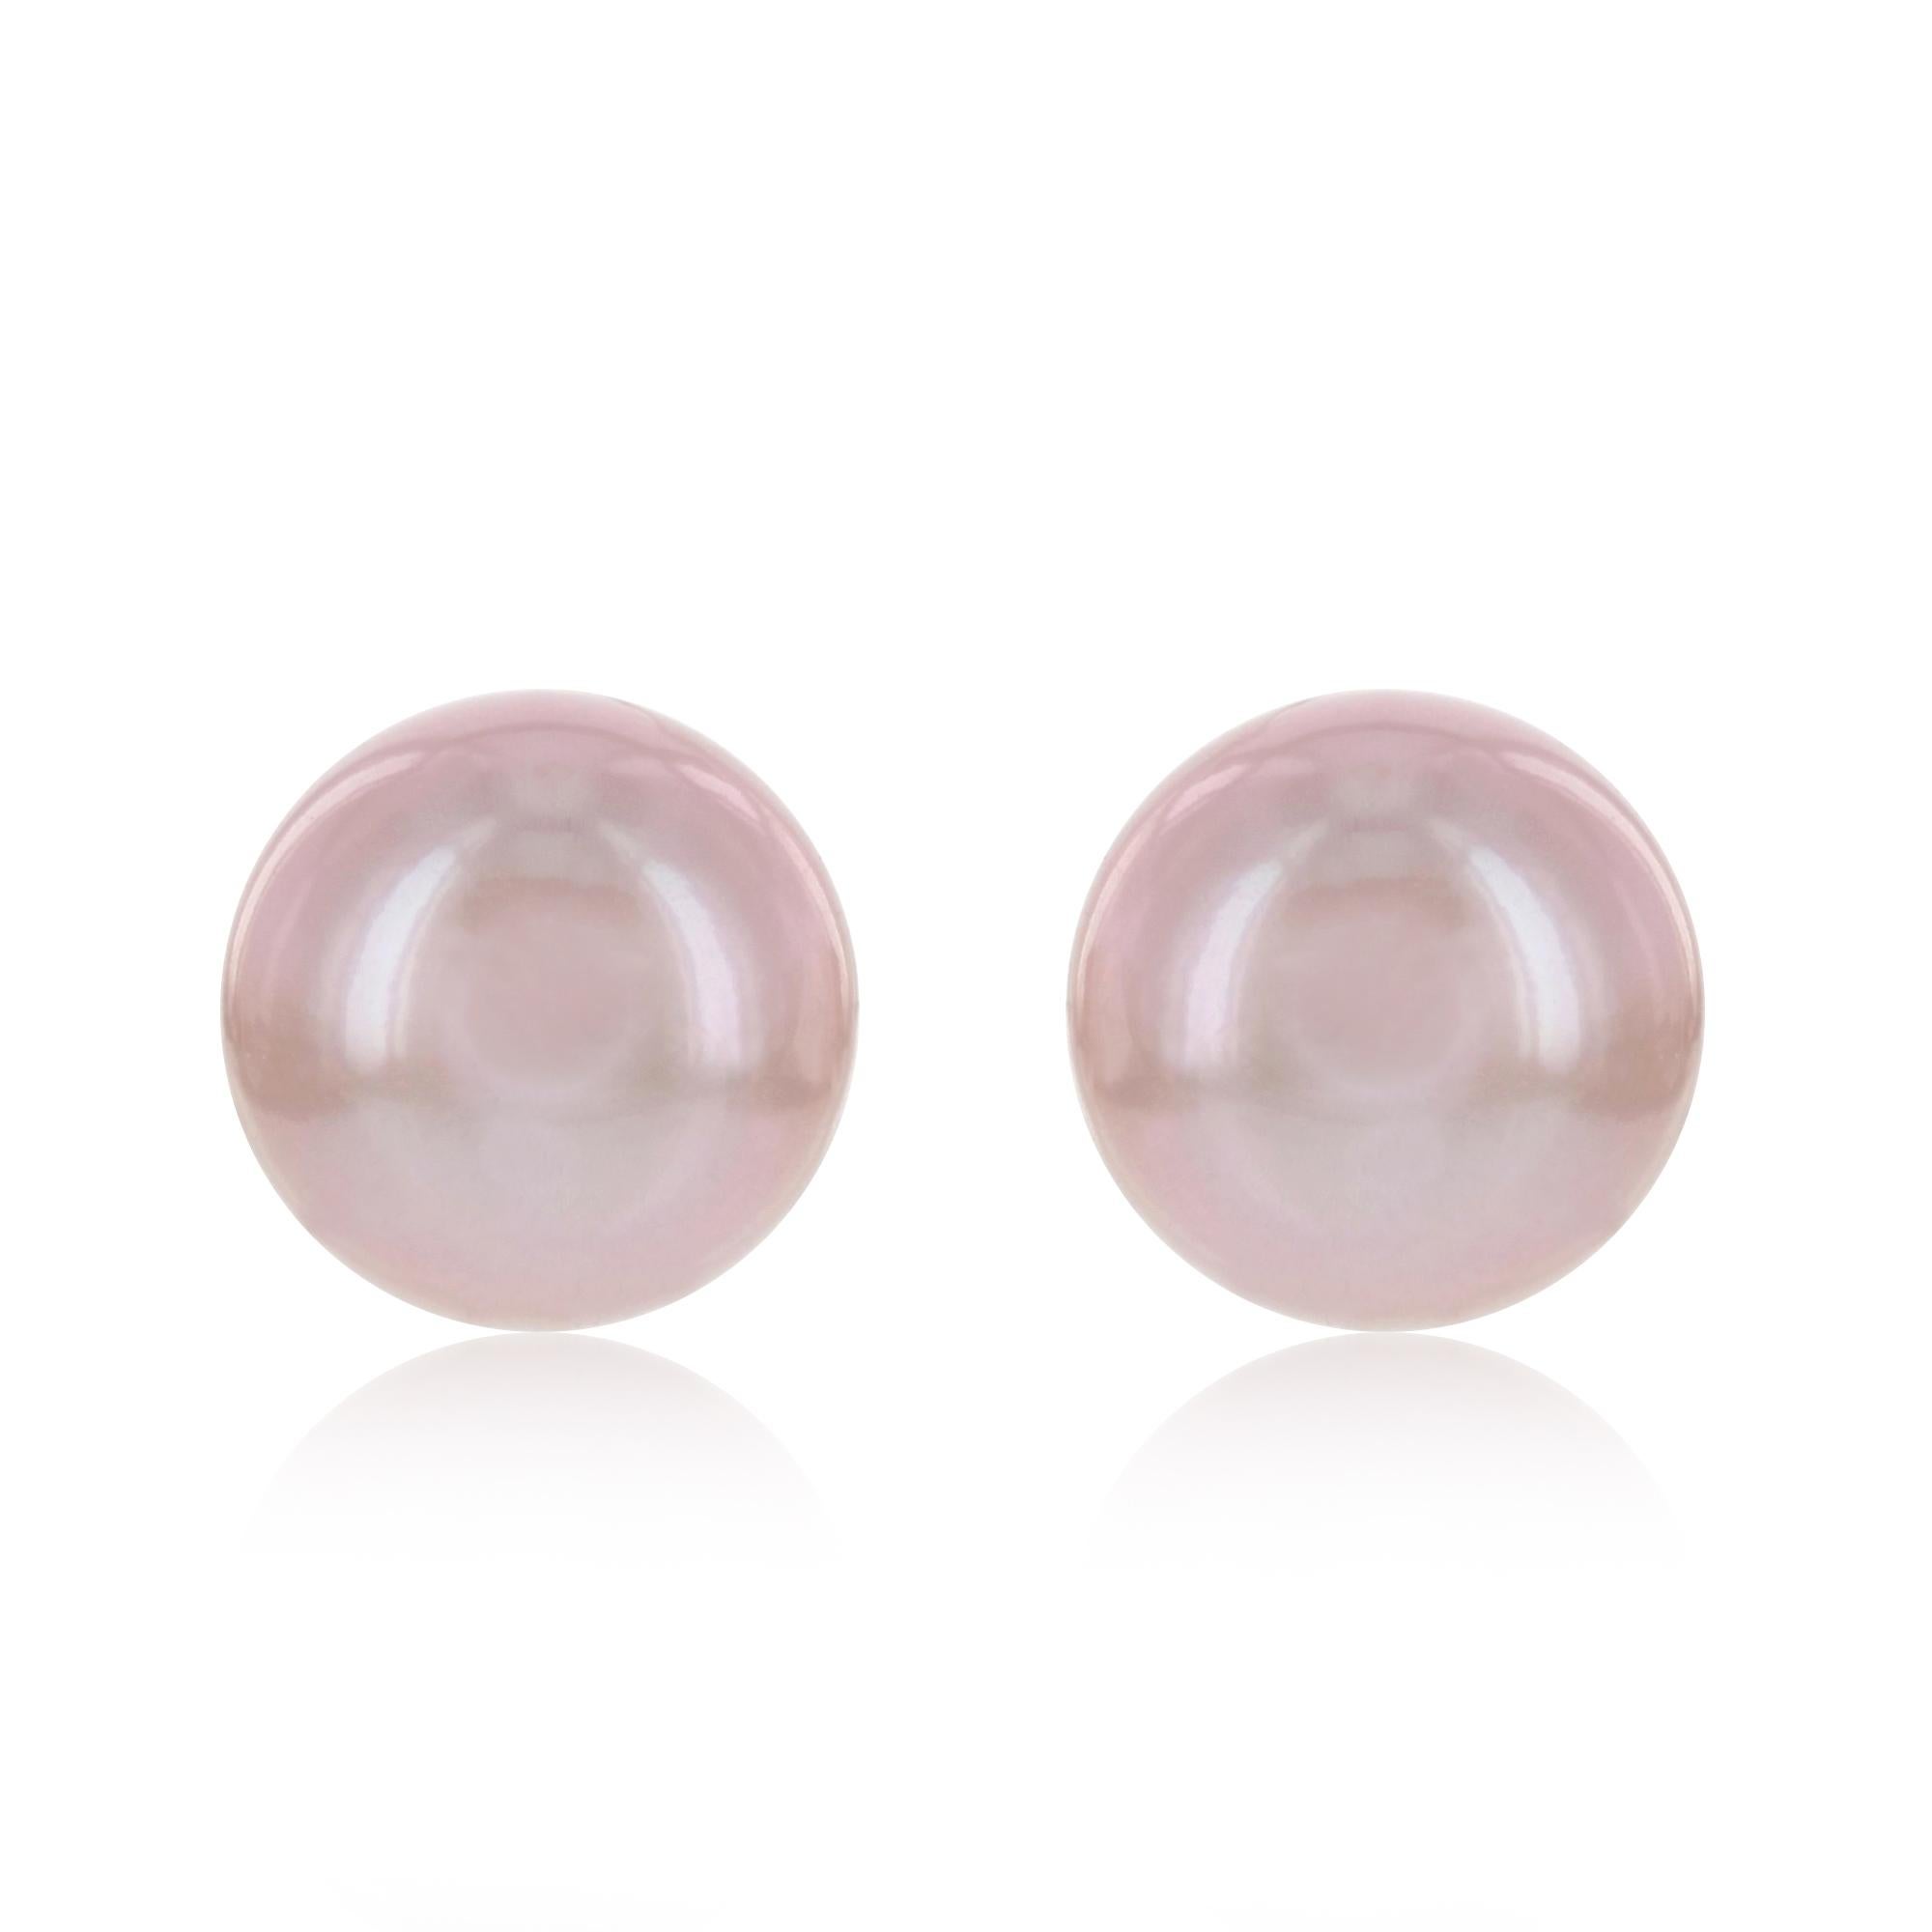 how much is pink pearl worth